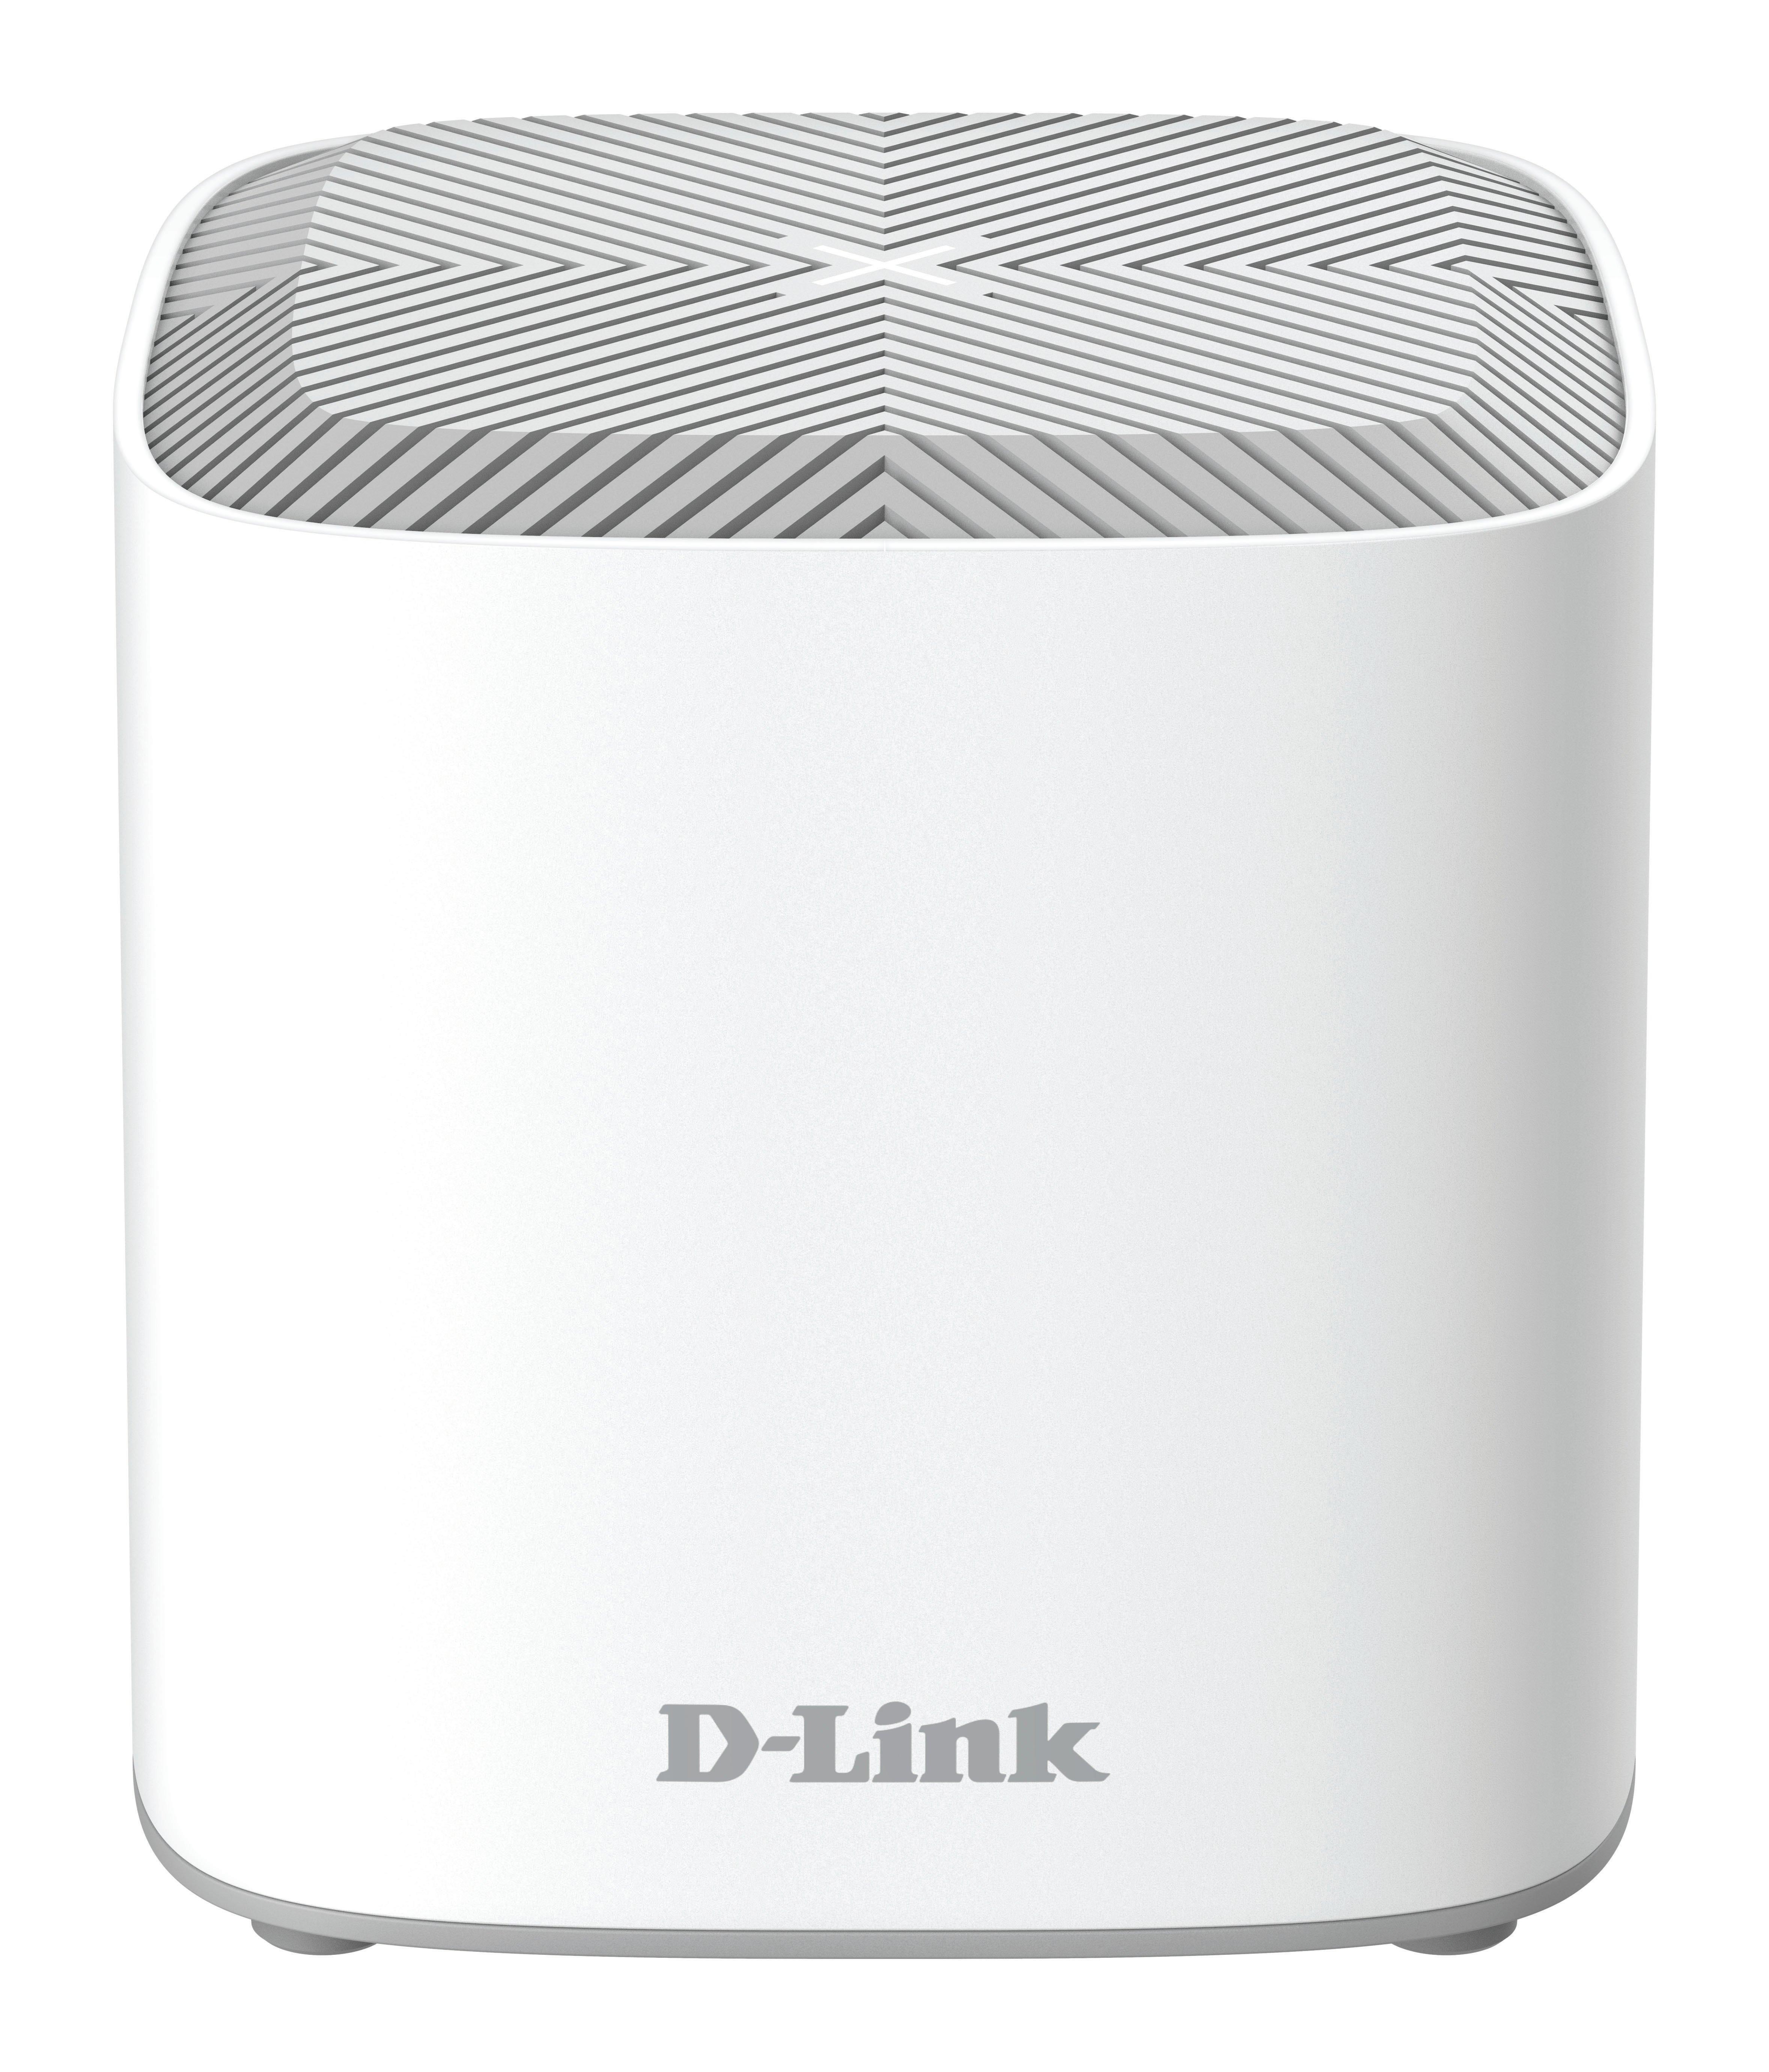 D-Link  COVR-X1863 punto accesso WLAN 1800 Mbit/s Bianco Supporto Power over Ethernet (PoE) 